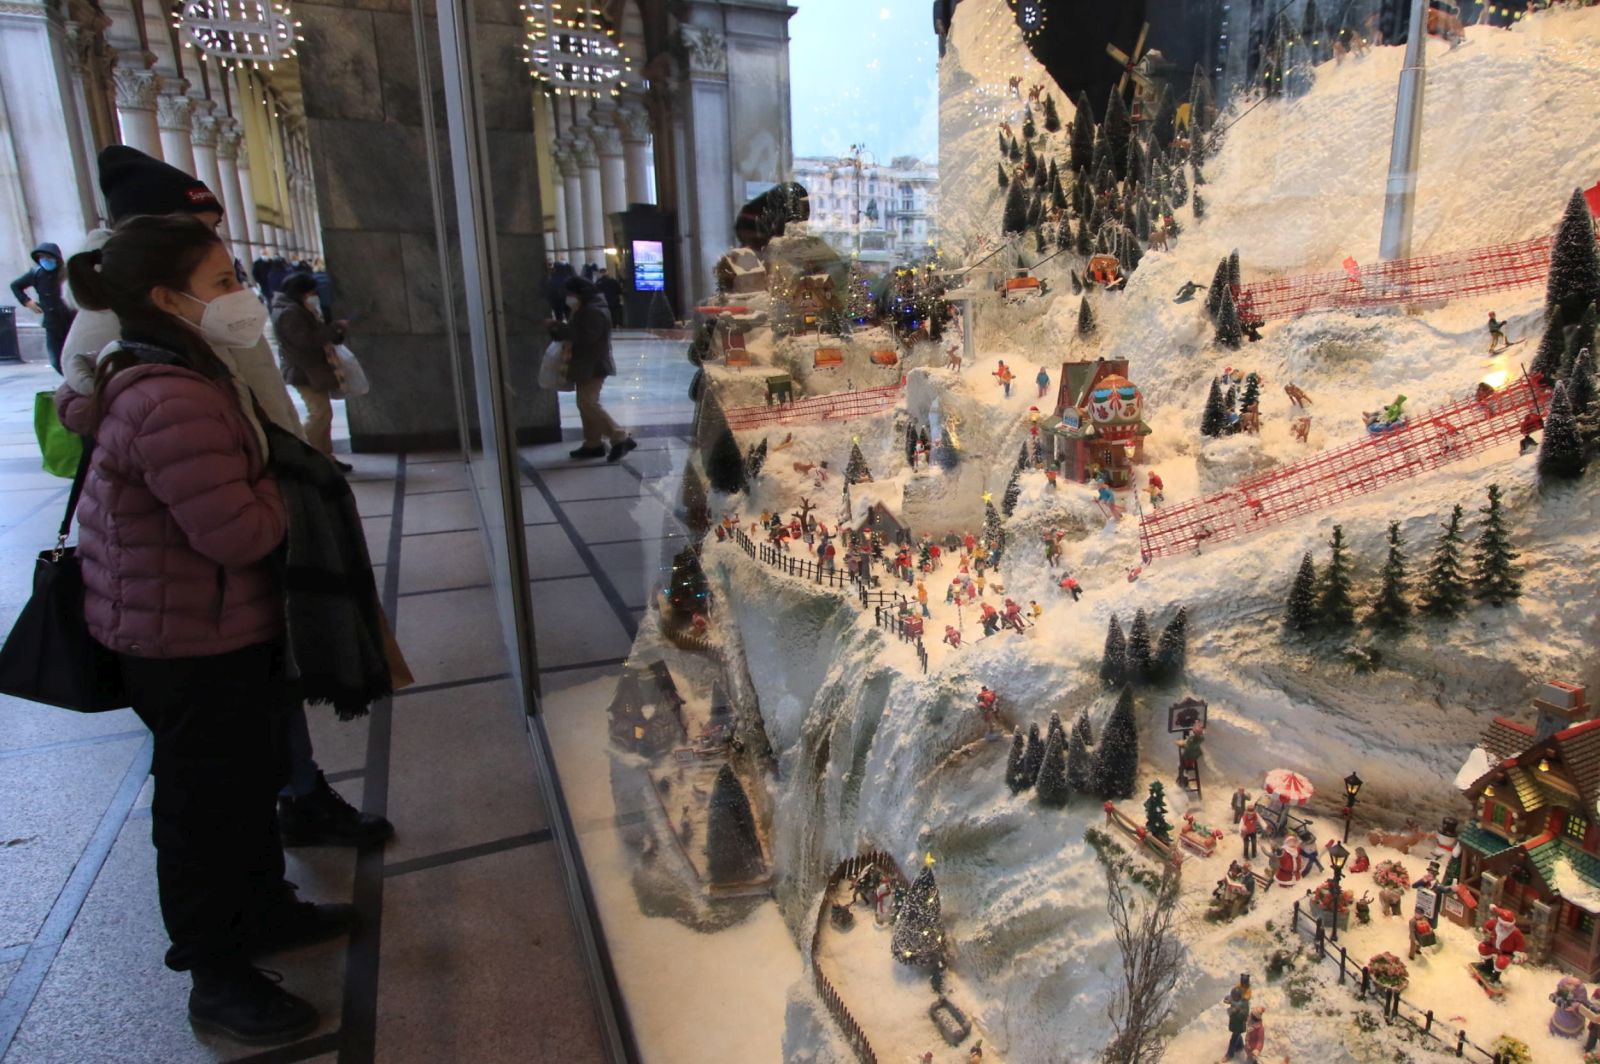 epa08854455 People look at a Christmas crib with wintersport and skiing related details set up in a window of the Rinascente store in Duomo Square in Milan, Italy, as people do their pre-Christmas shopping on 01 December 2020. Italian Prime Minister Giuseppe Conte already in November called on Italians not to ski during the Christmas holidays in order to curb the spread of the coronavirus during the second wave of the pandemic.  EPA/PAOLO SALMOIRAGO